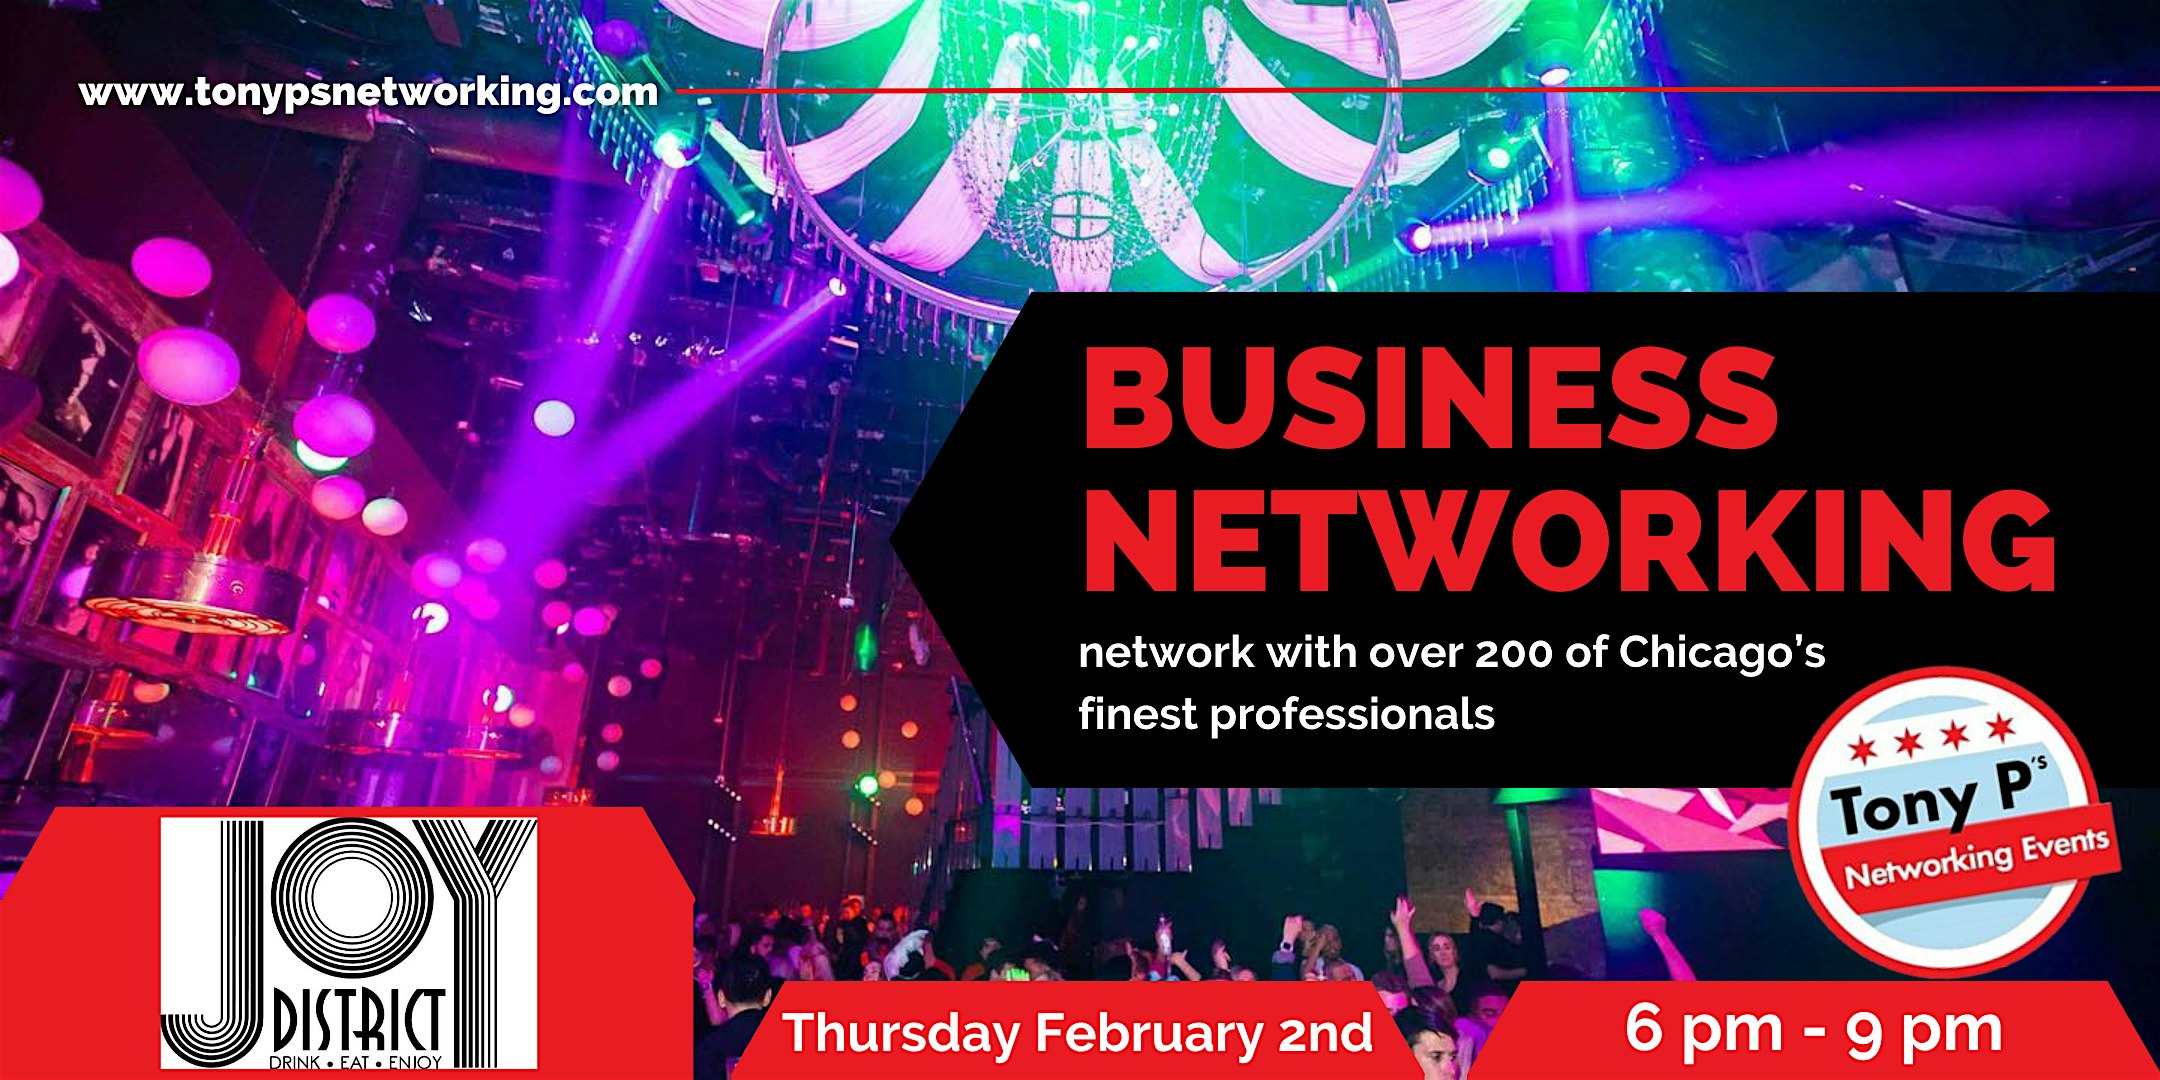 Tony P’s Business Networking Event at Joy District – Thursday February 2nd